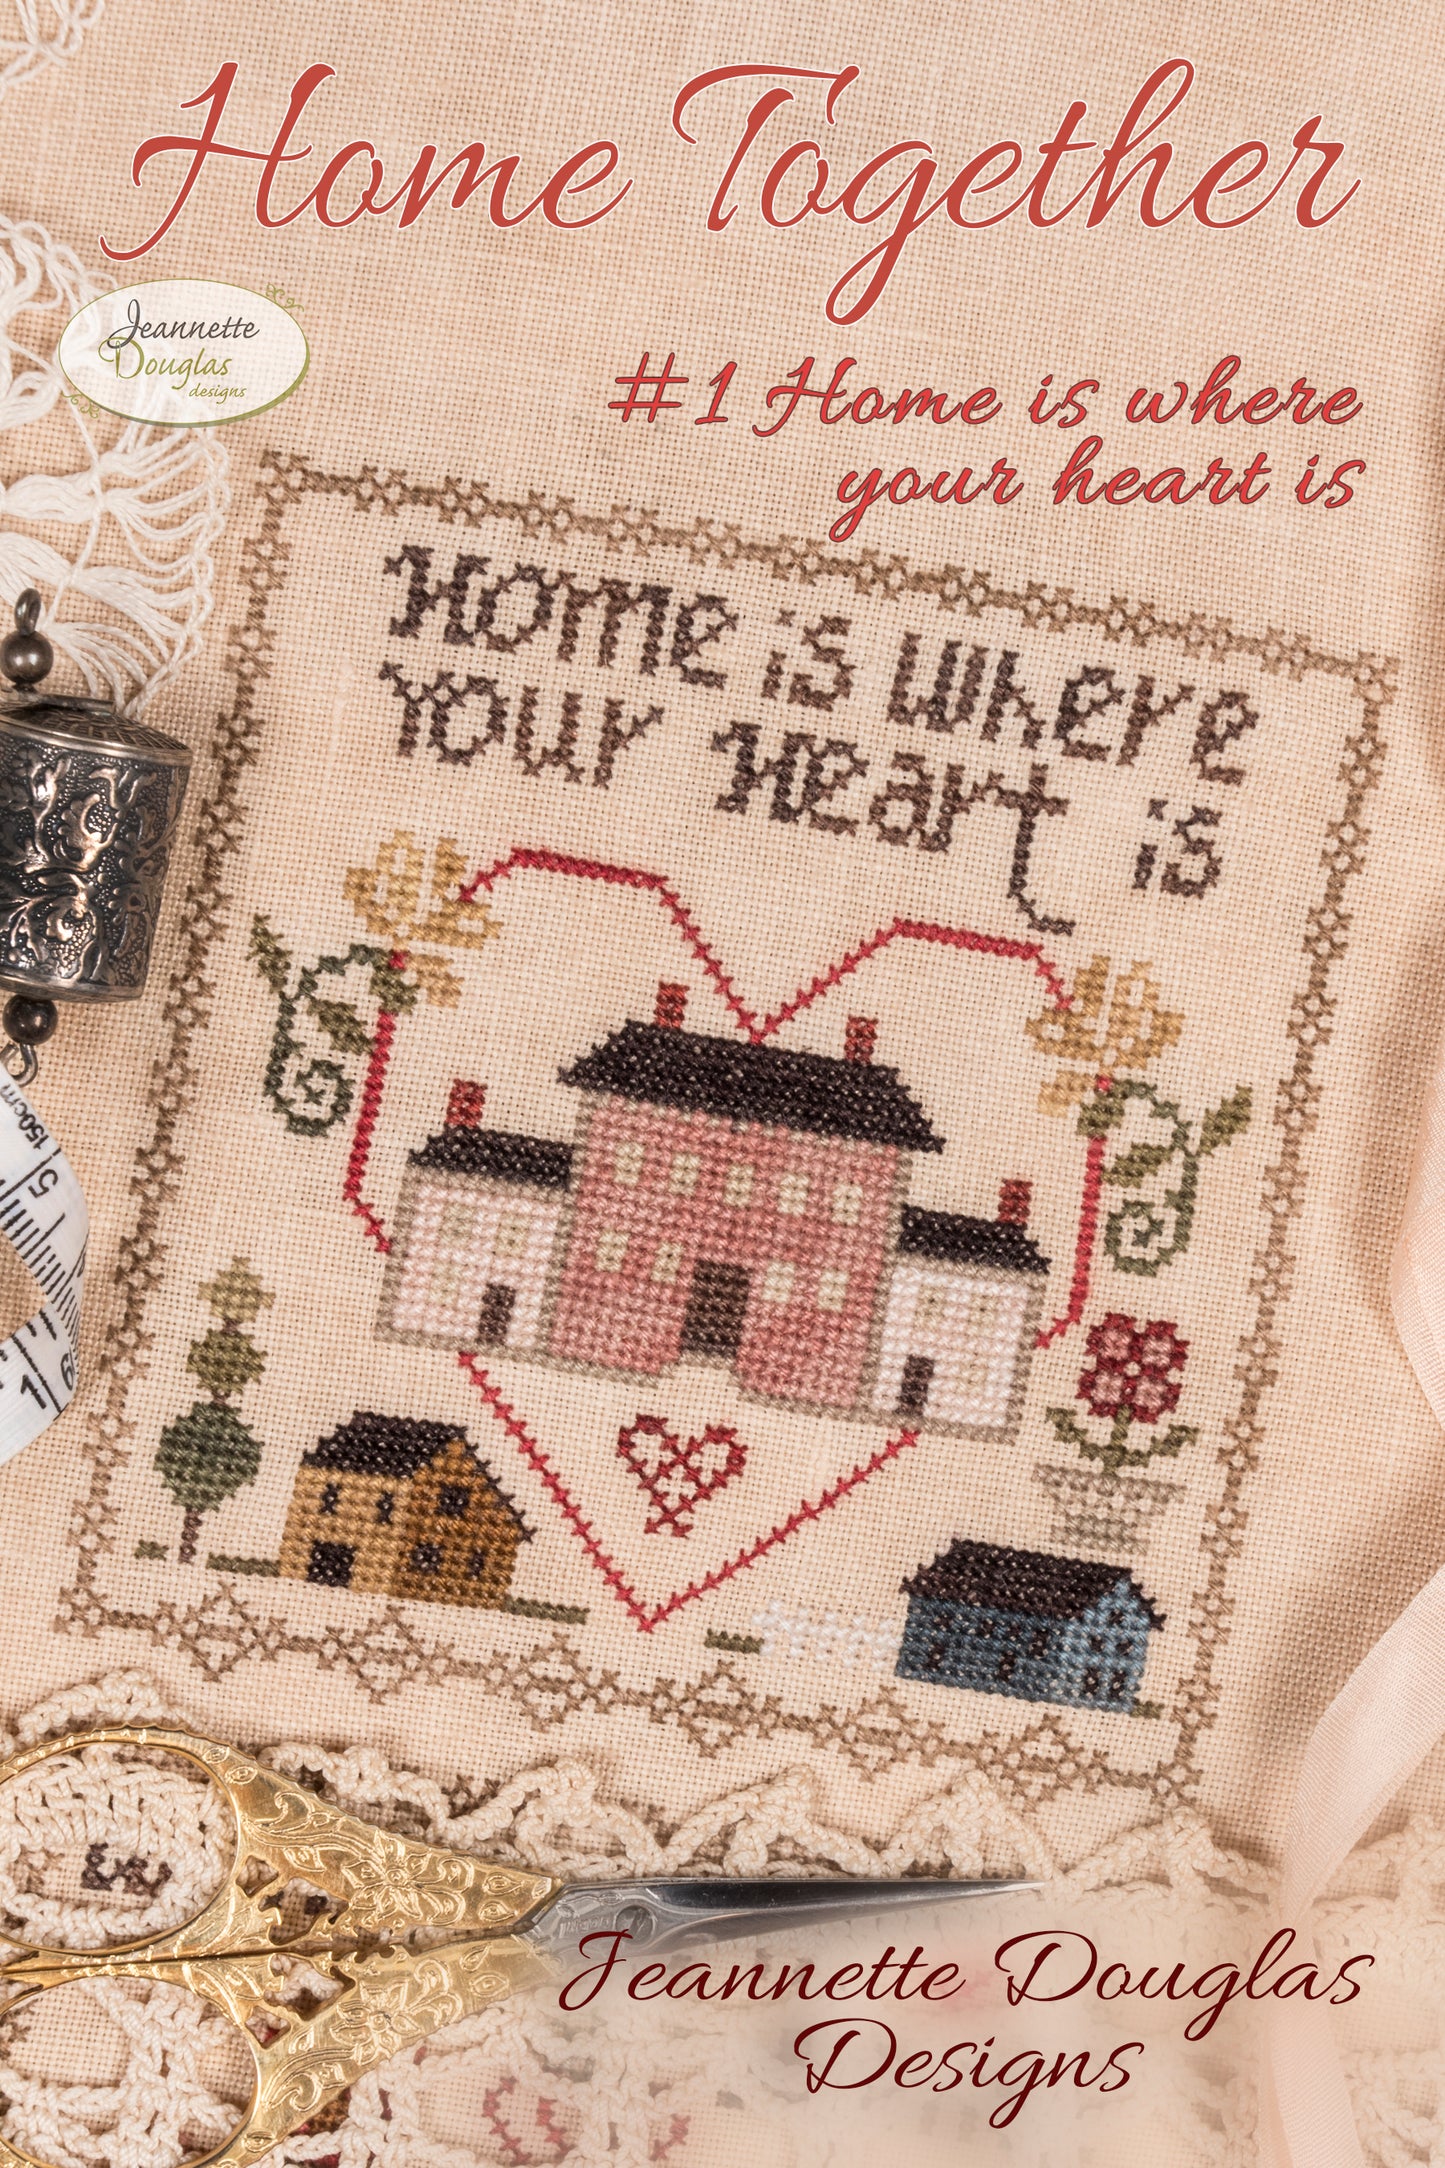 Home Together # 1 Home is where your heart is - Cross Stitch Pattern